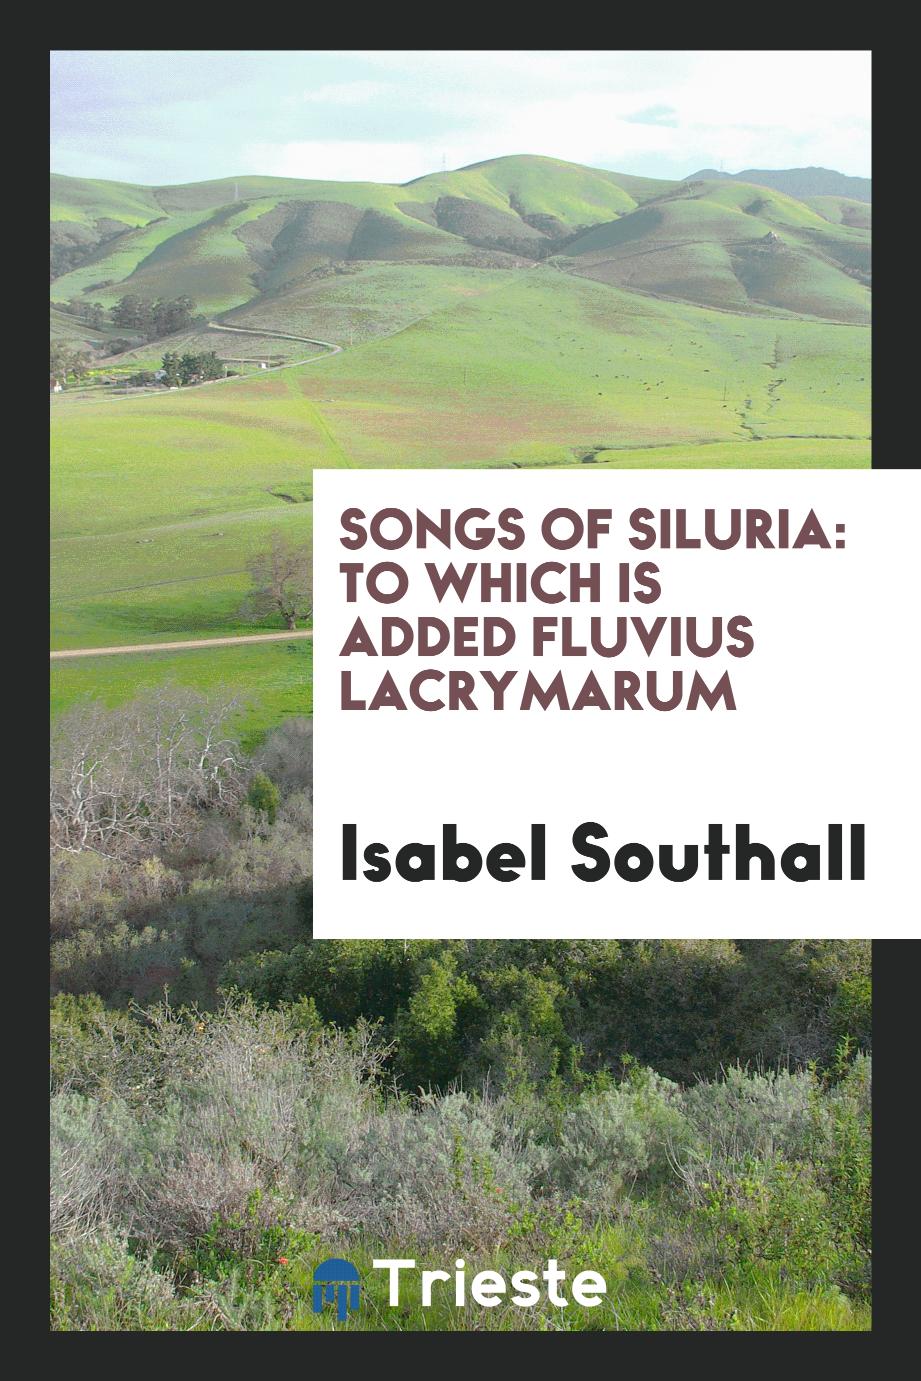 Songs of Siluria: To Which is Added Fluvius Lacrymarum